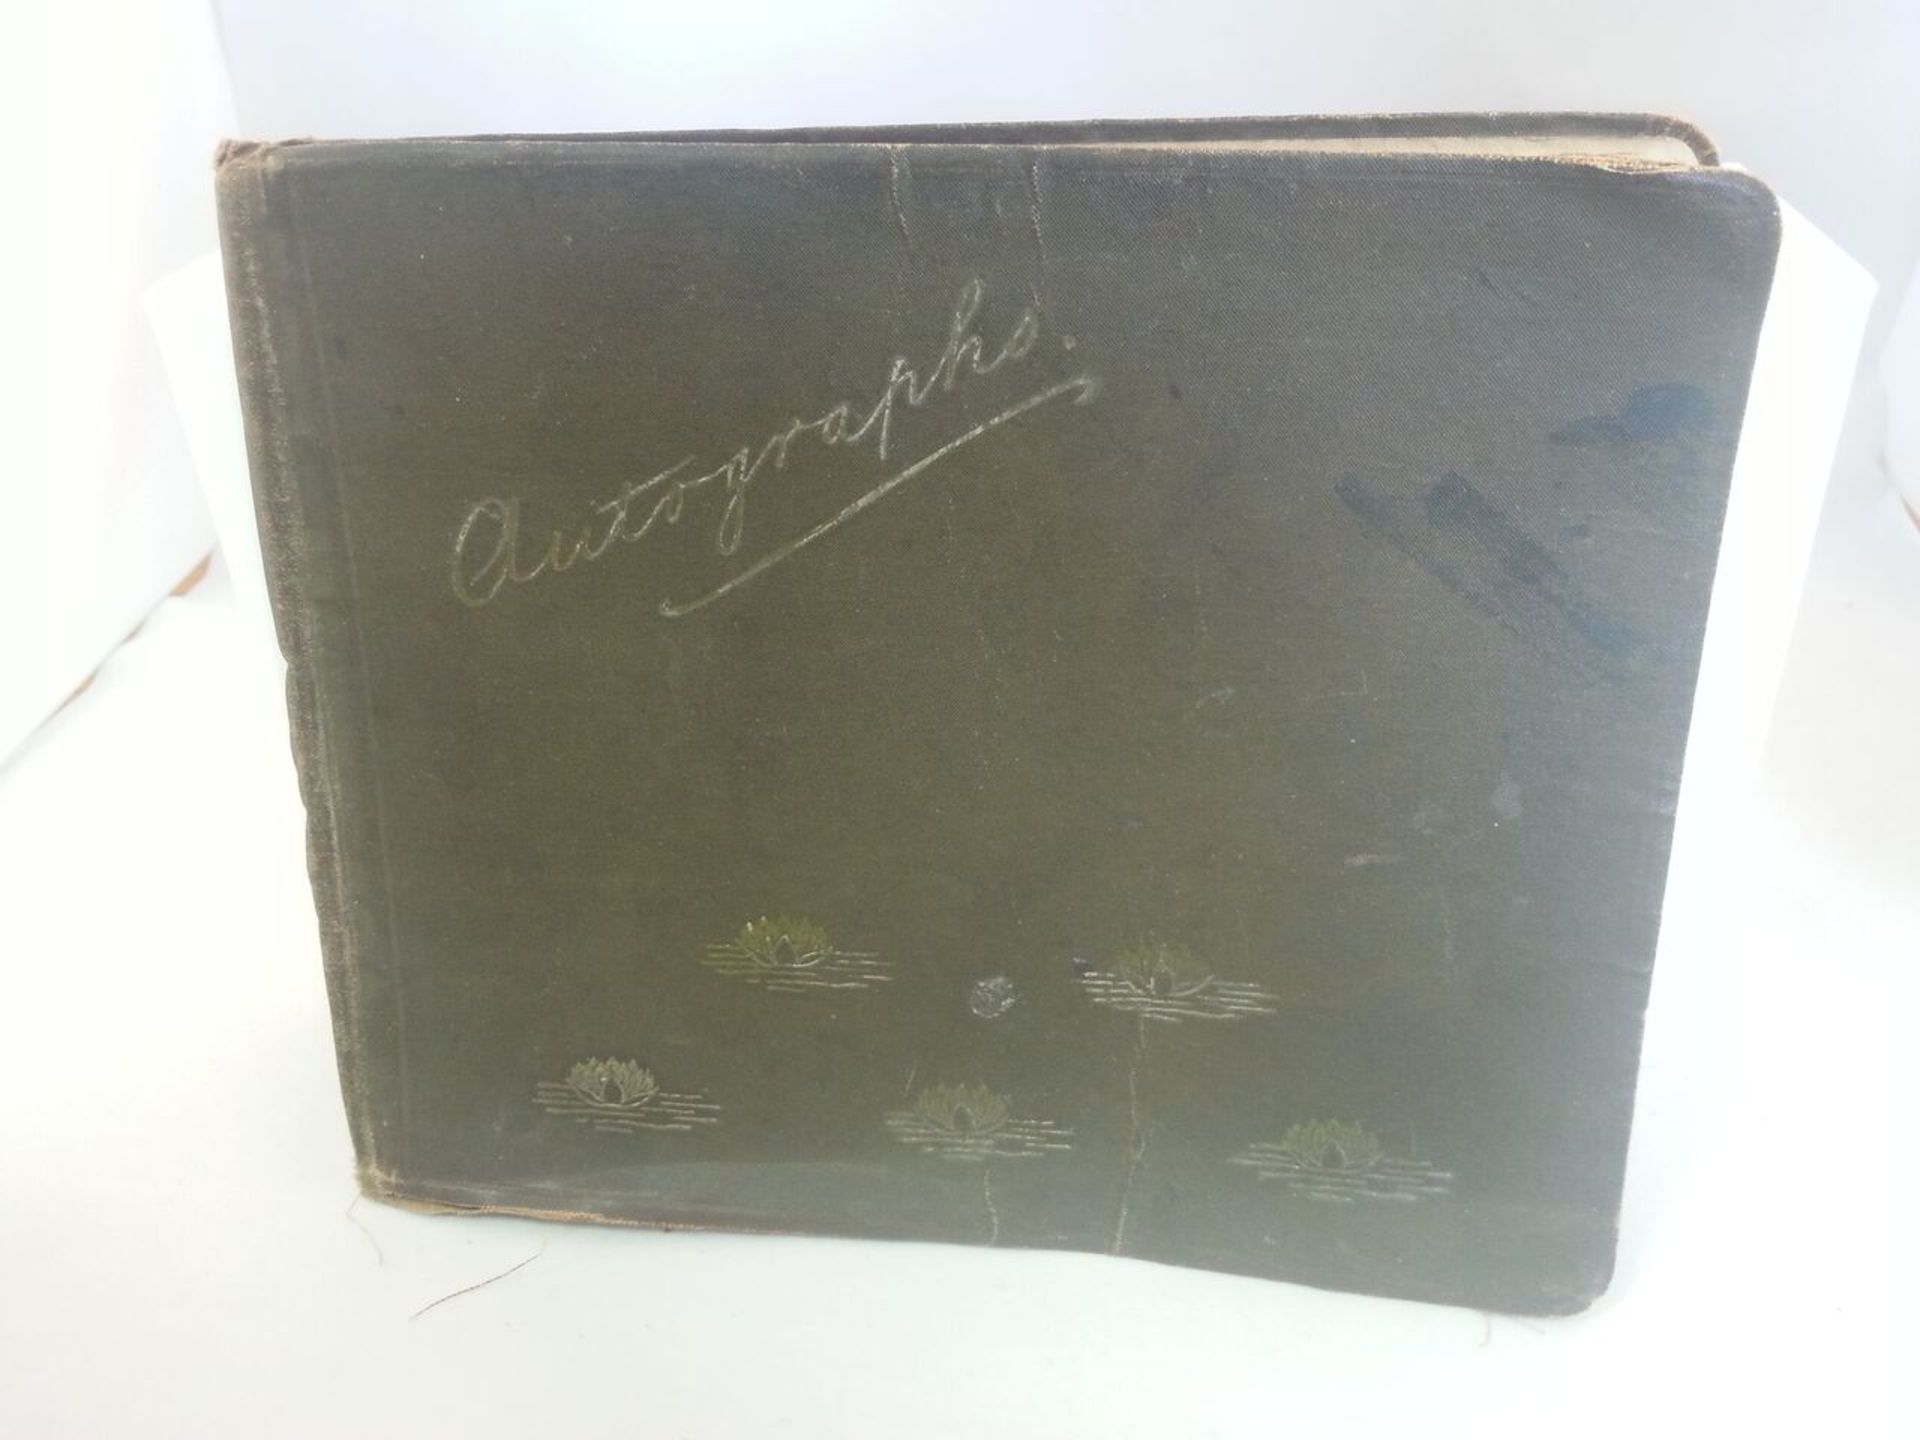 Exceptional early 20th Century (1903 - 1905) sketch and jottings book. Circa 95 pages FULL of